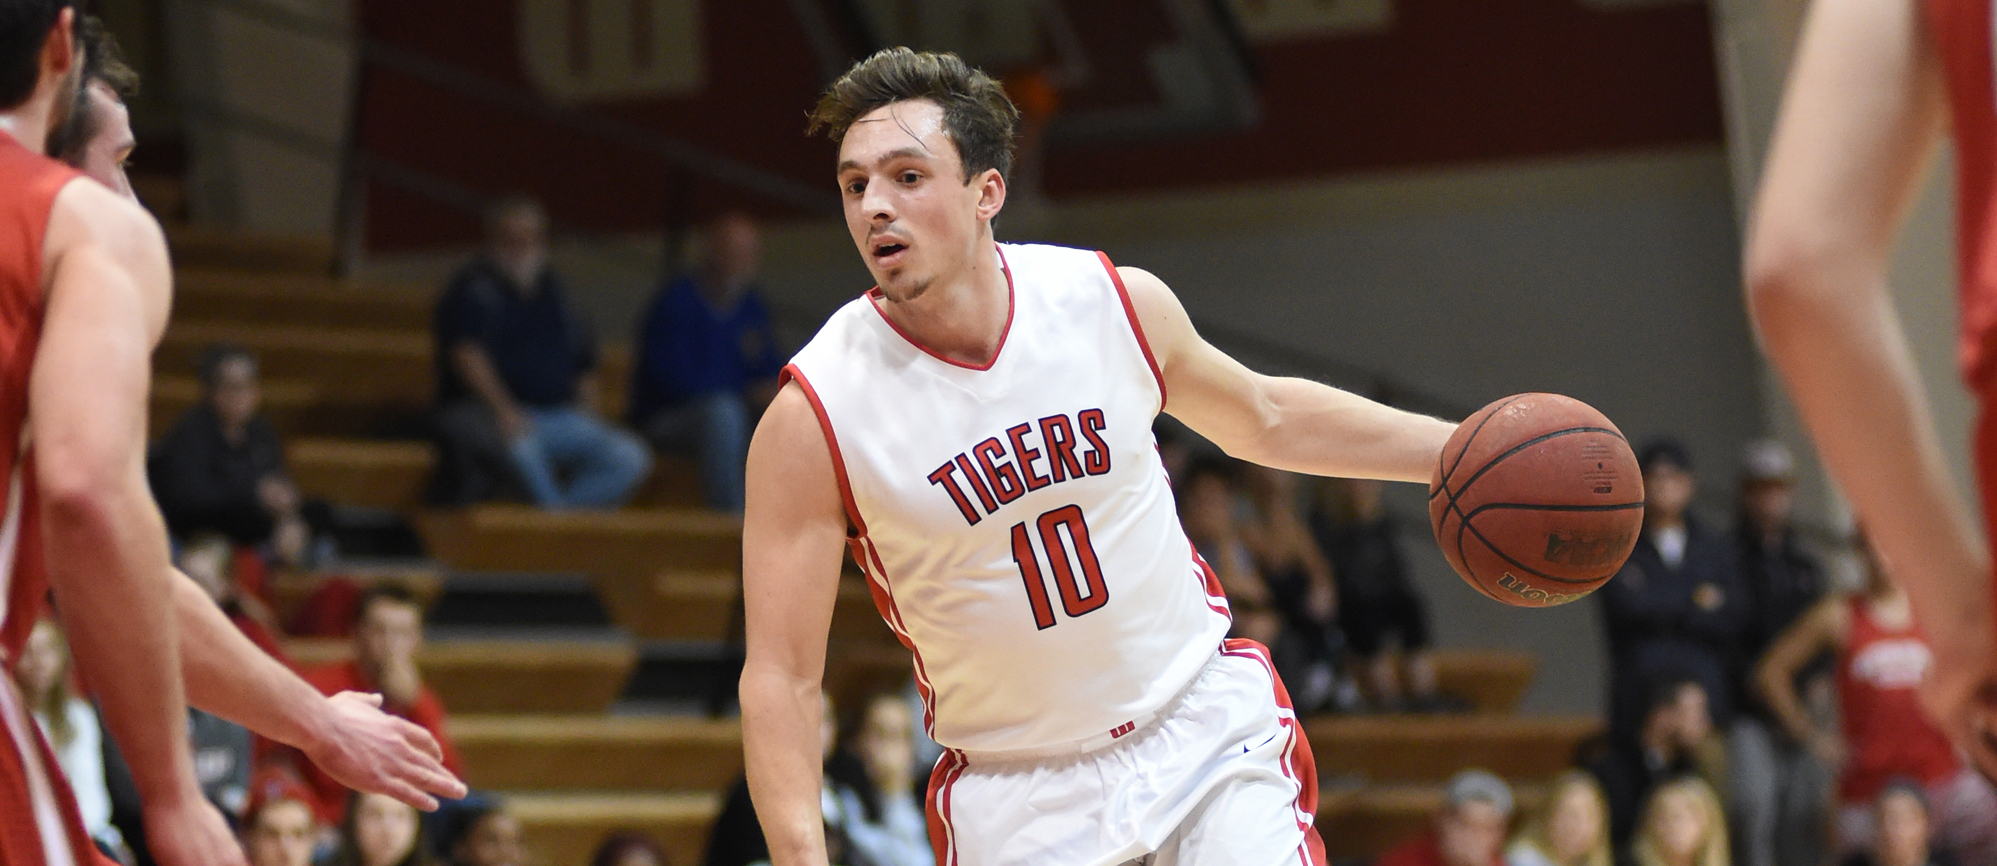 Cody Phillippi netted 13 points and six rebounds for the Tigers Wednesday night. File Photo| Nick Falzerano